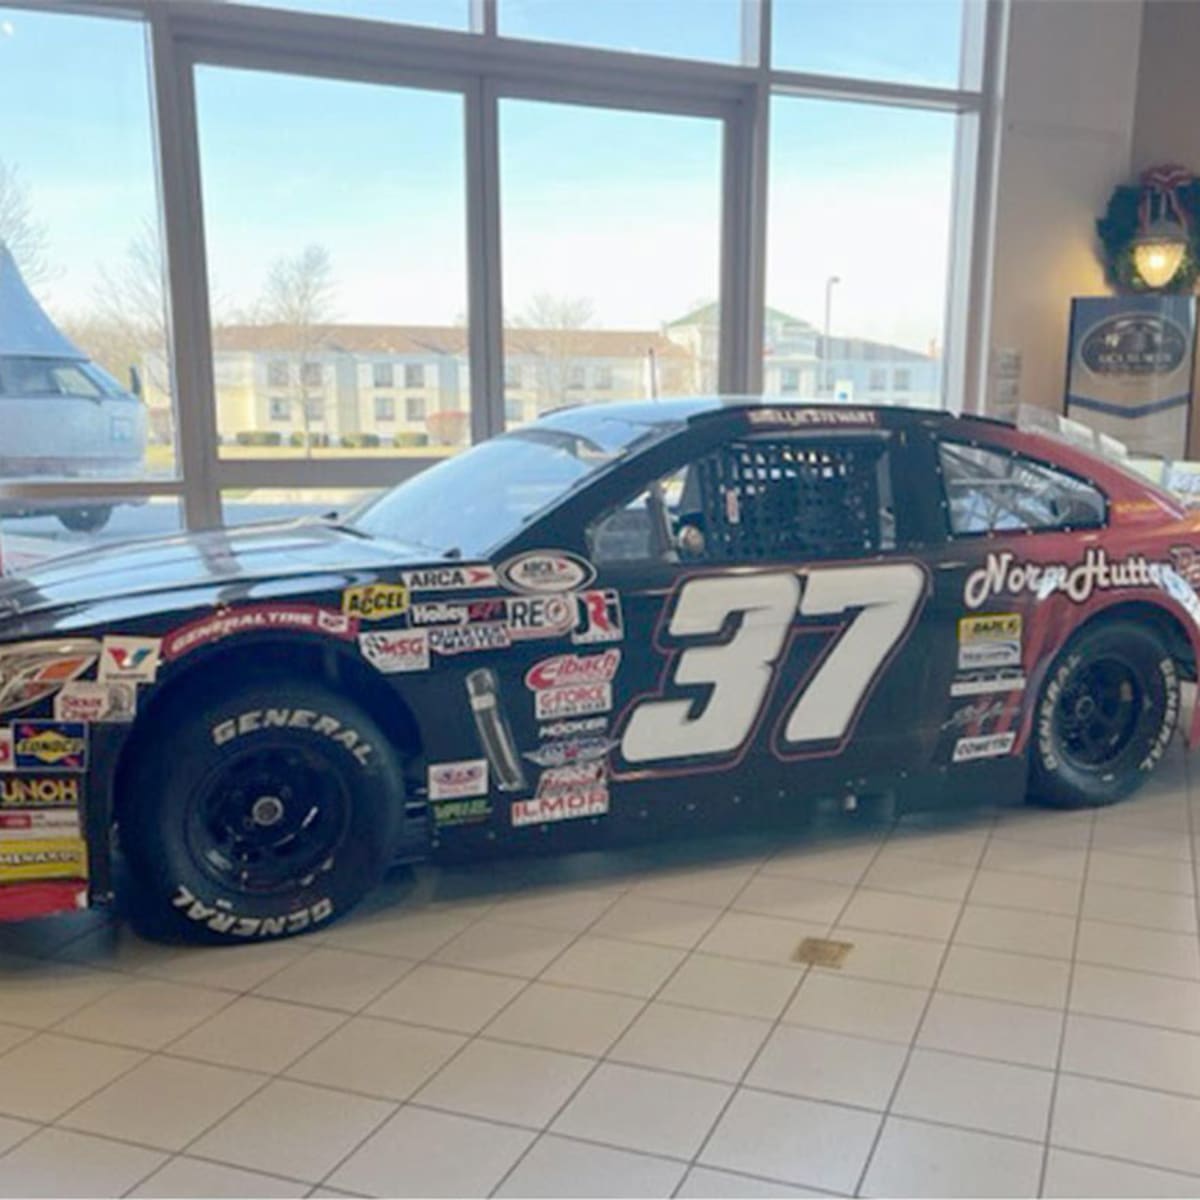 AACA Museum Live presents NASCAR and ARCA Racing on March 25th